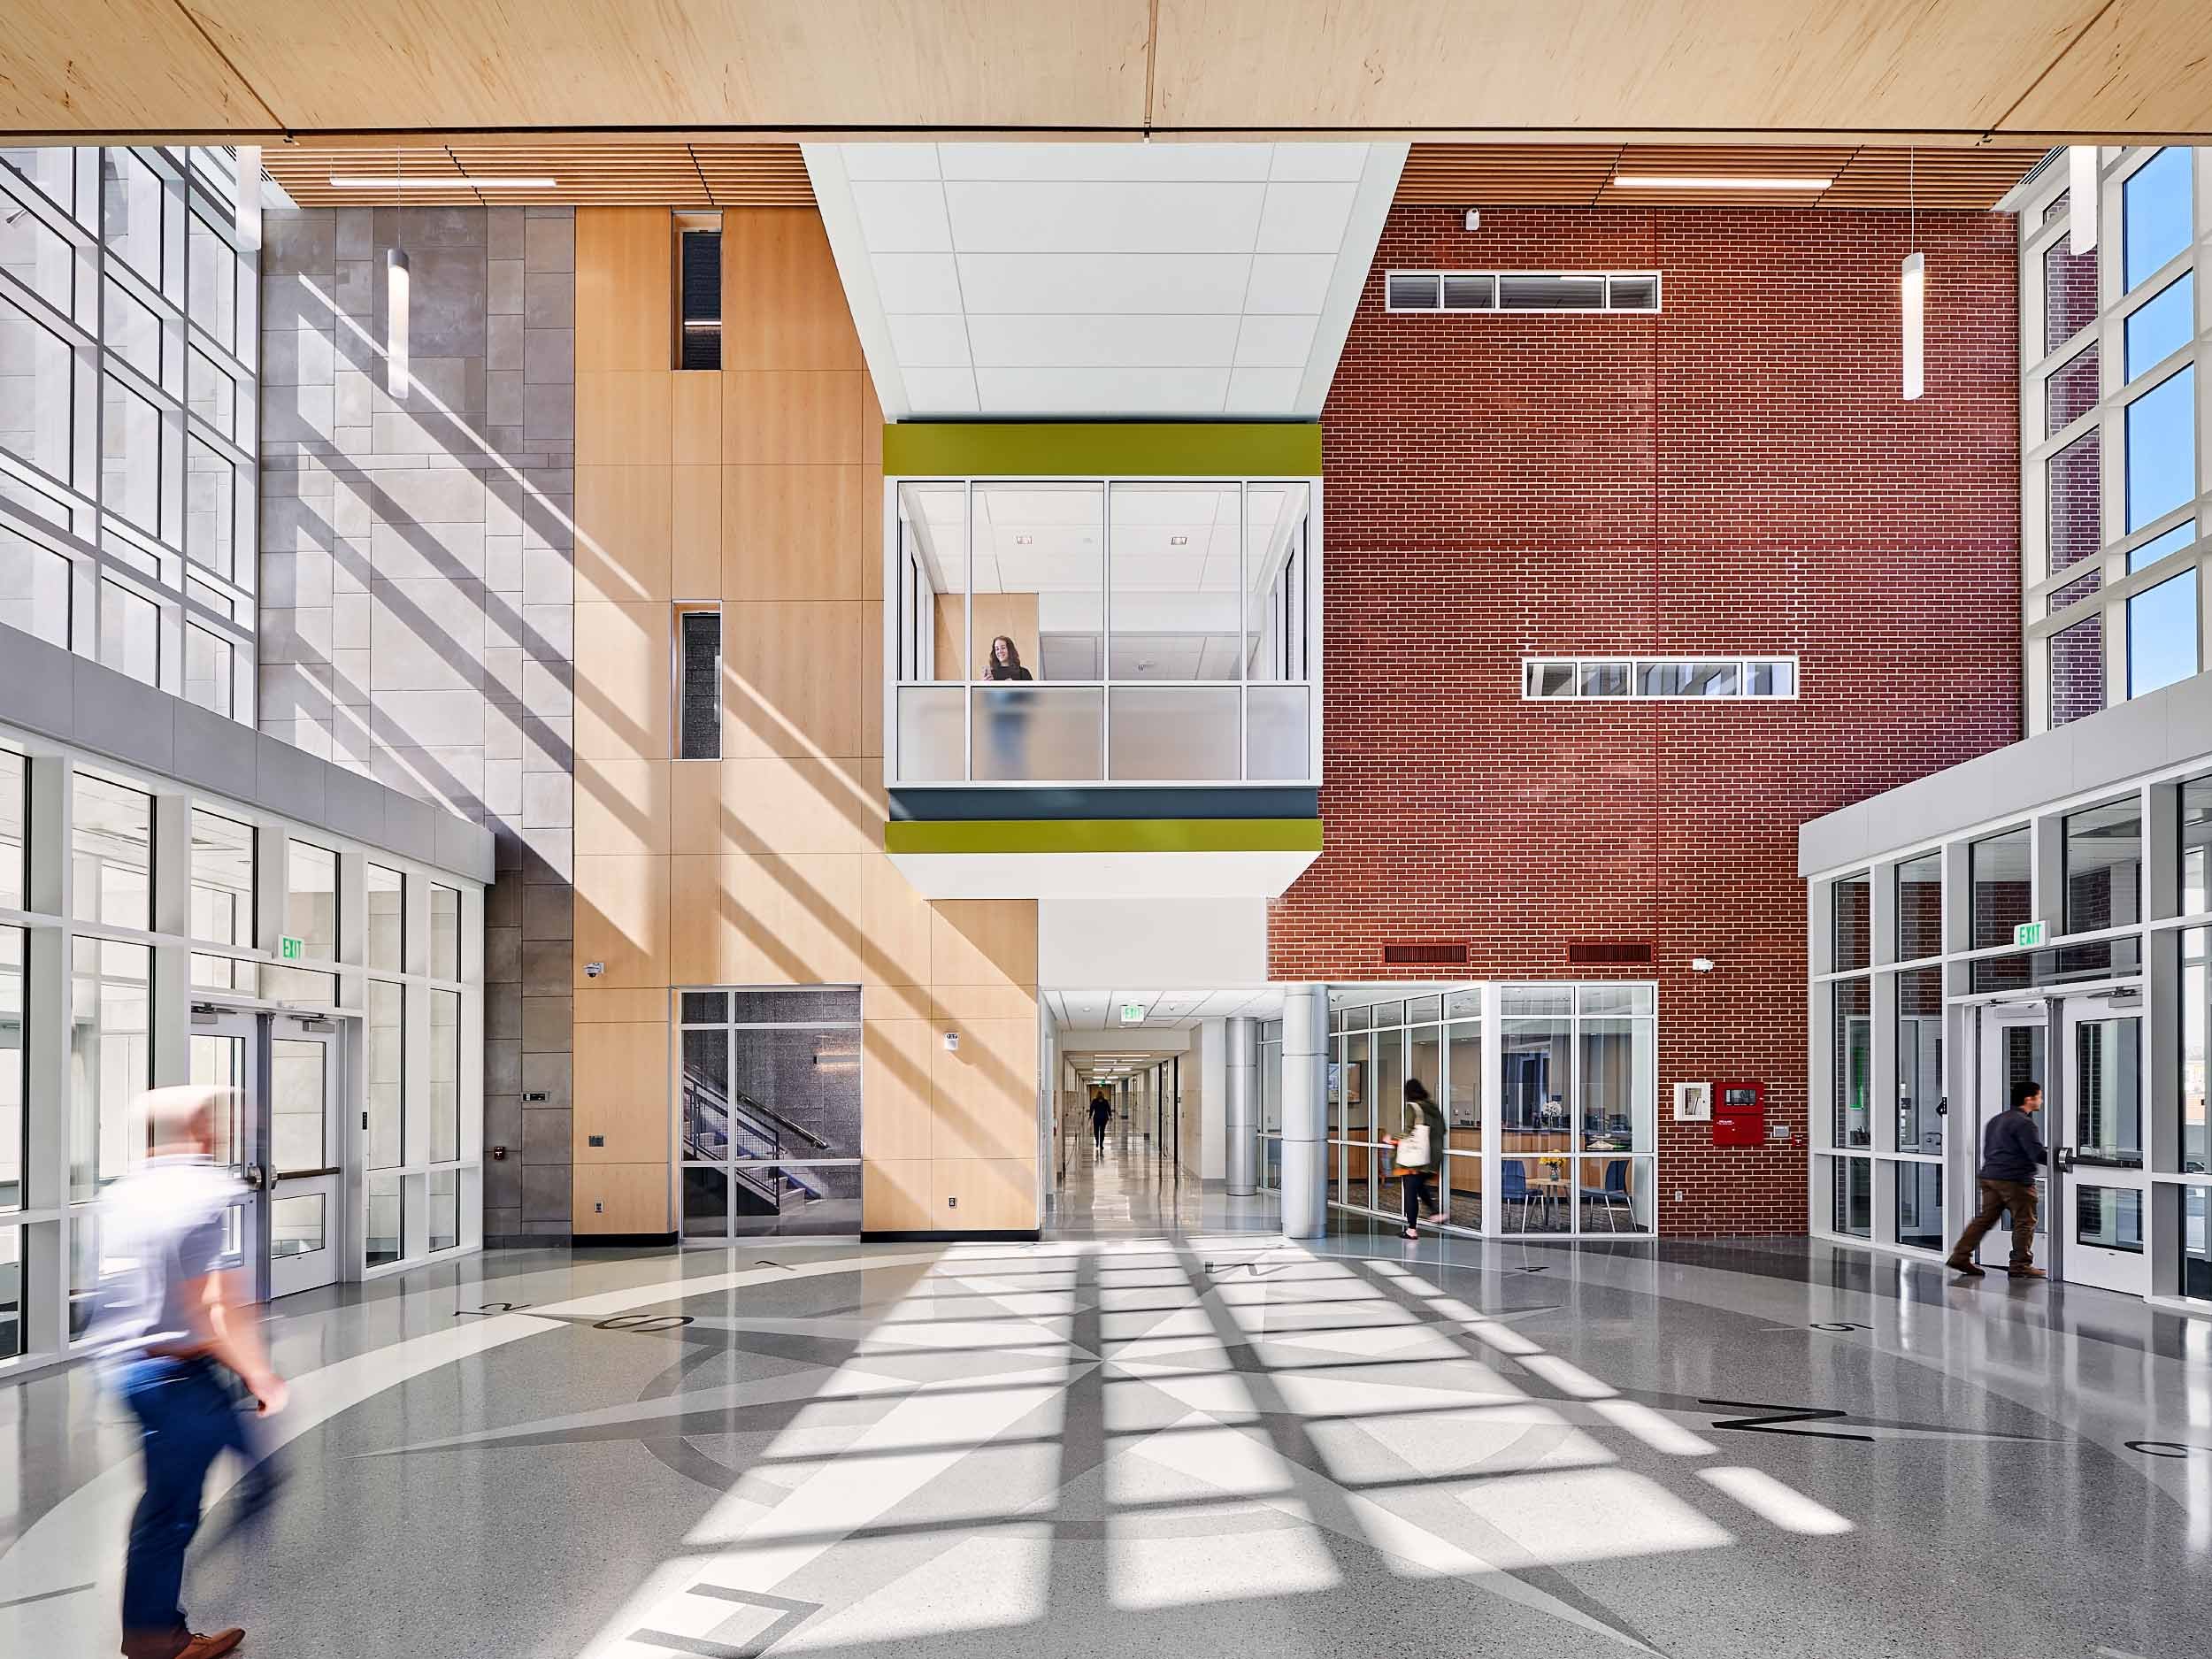  Anna Mae Hayes Elementary Breslin Architects Allentown, PA 